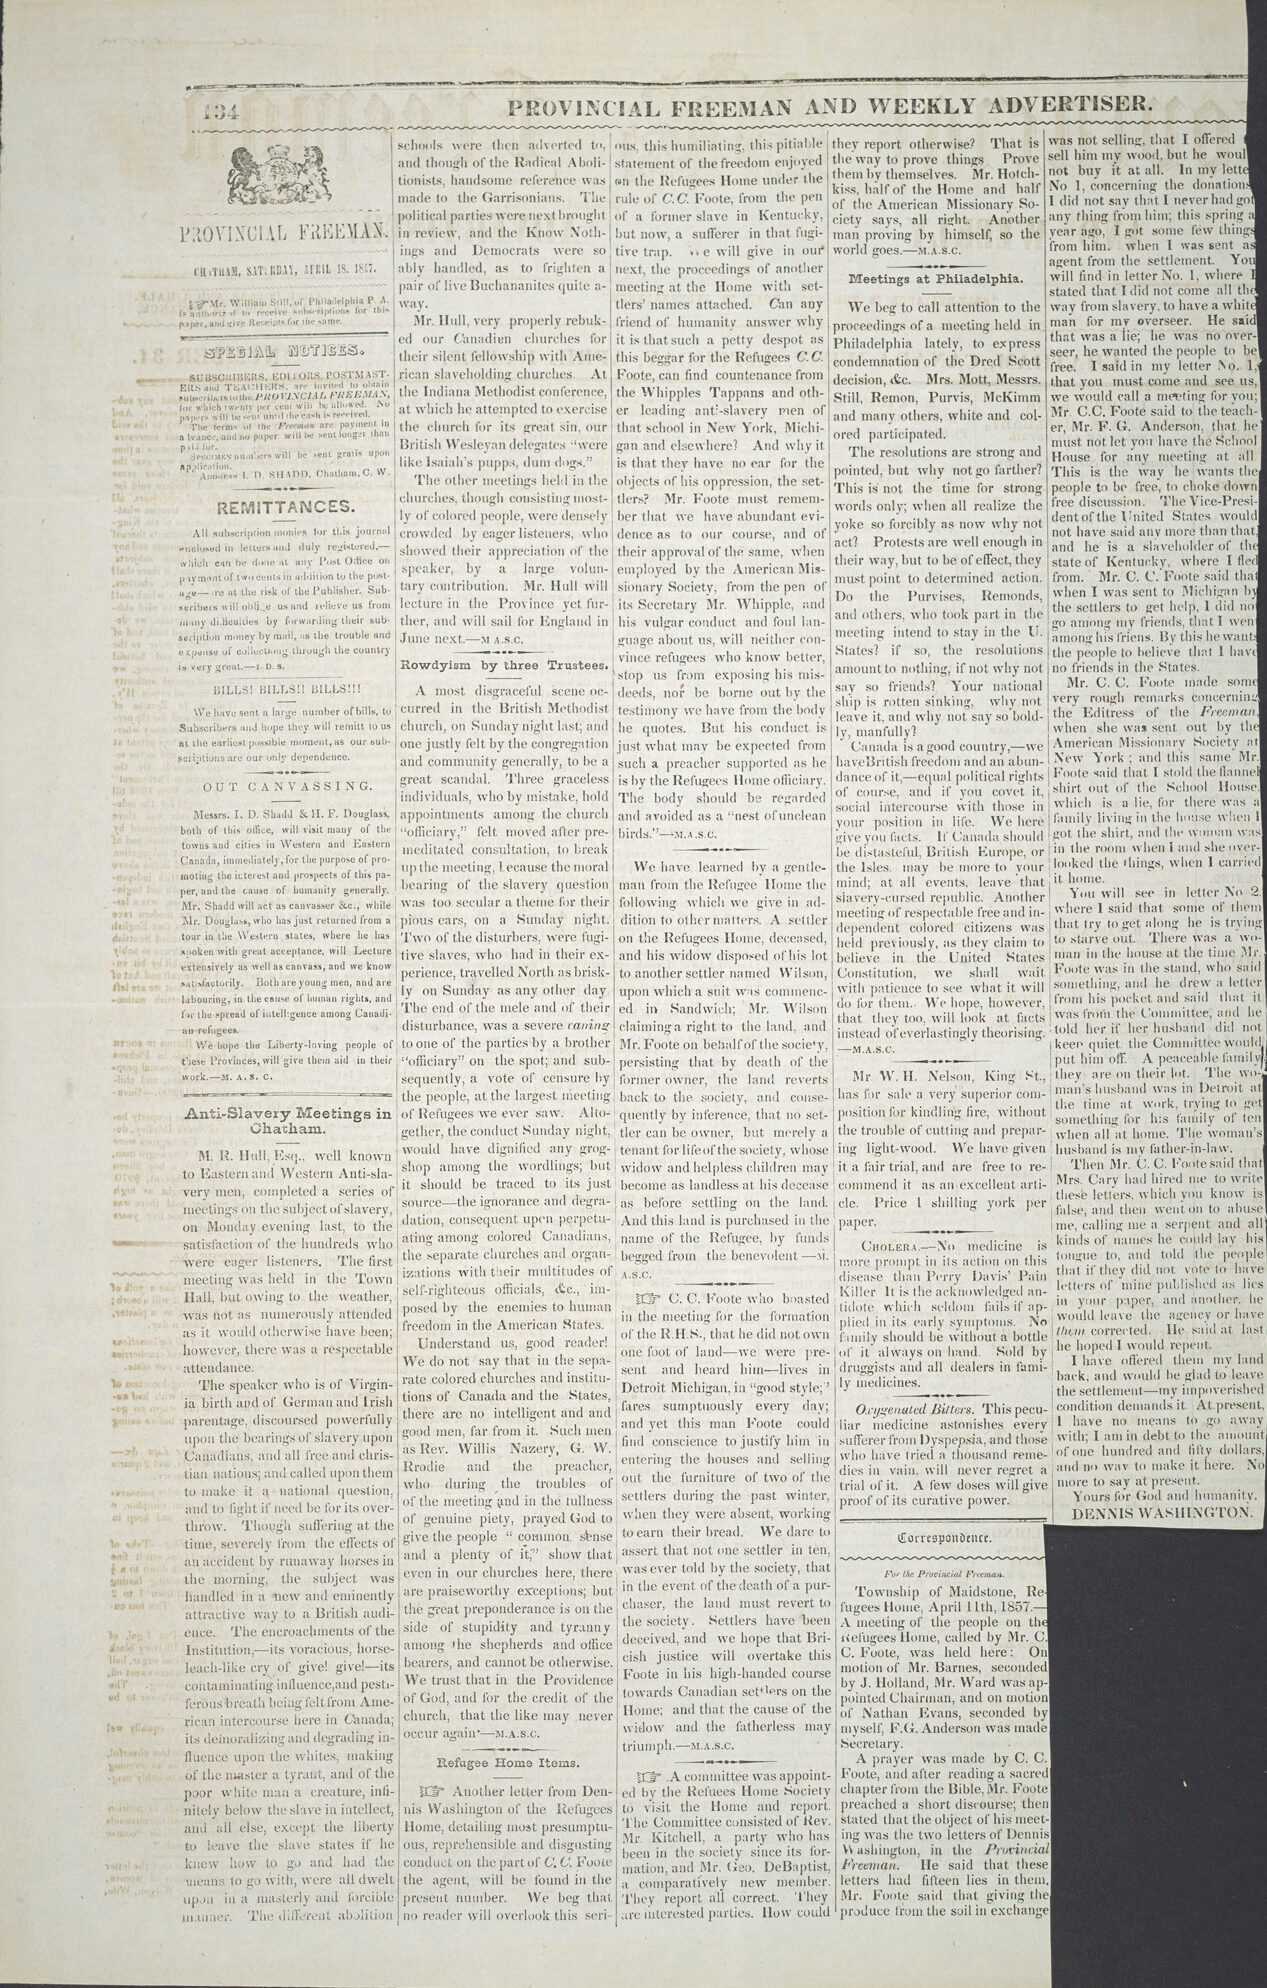 Page from "Provincial Freeman and Weekly Advertiser," April 8, 1857